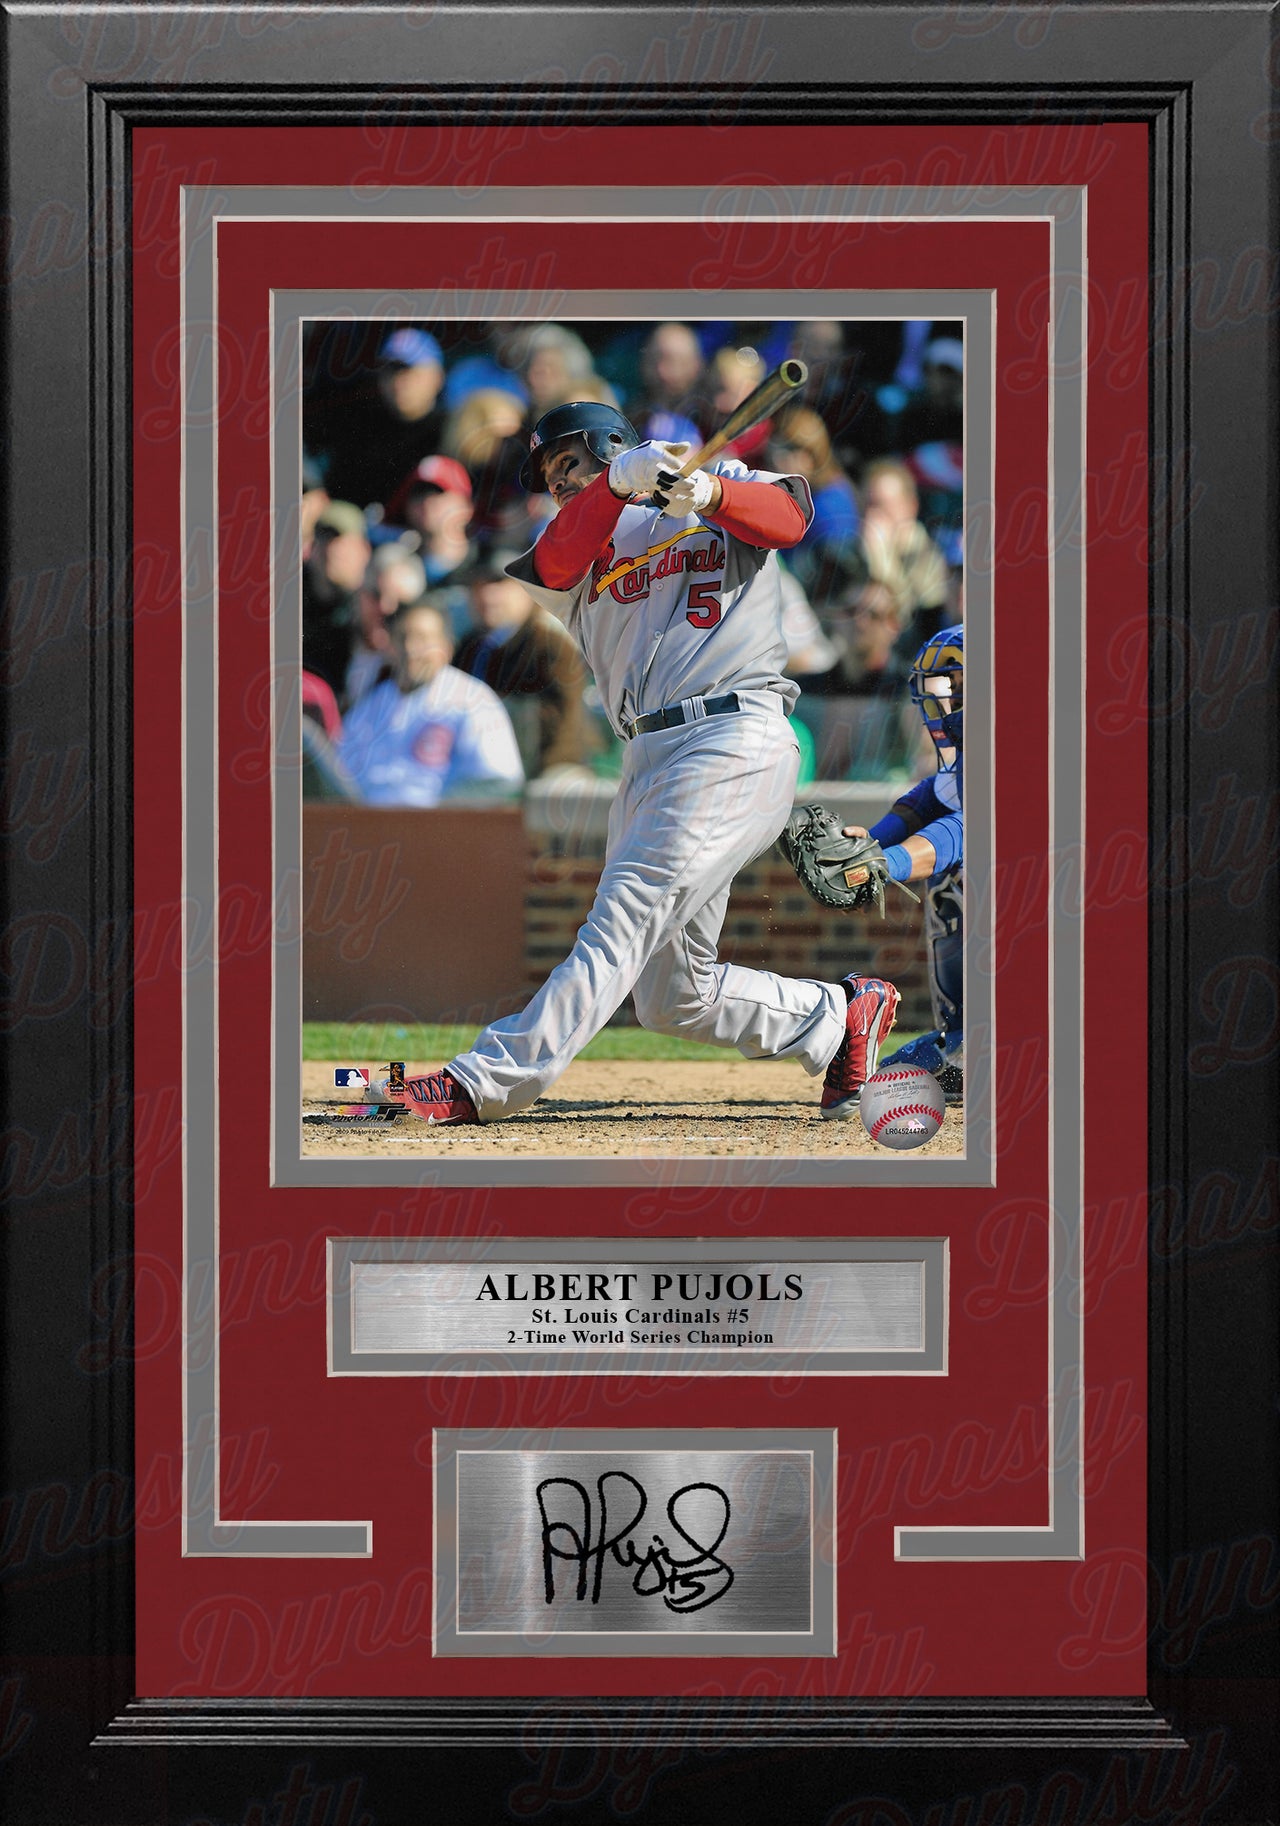 Albert Pujols Home Run Swing St. Louis Cardinals 8" x 10" Framed Baseball Photo with Engraved Autograph - Dynasty Sports & Framing 